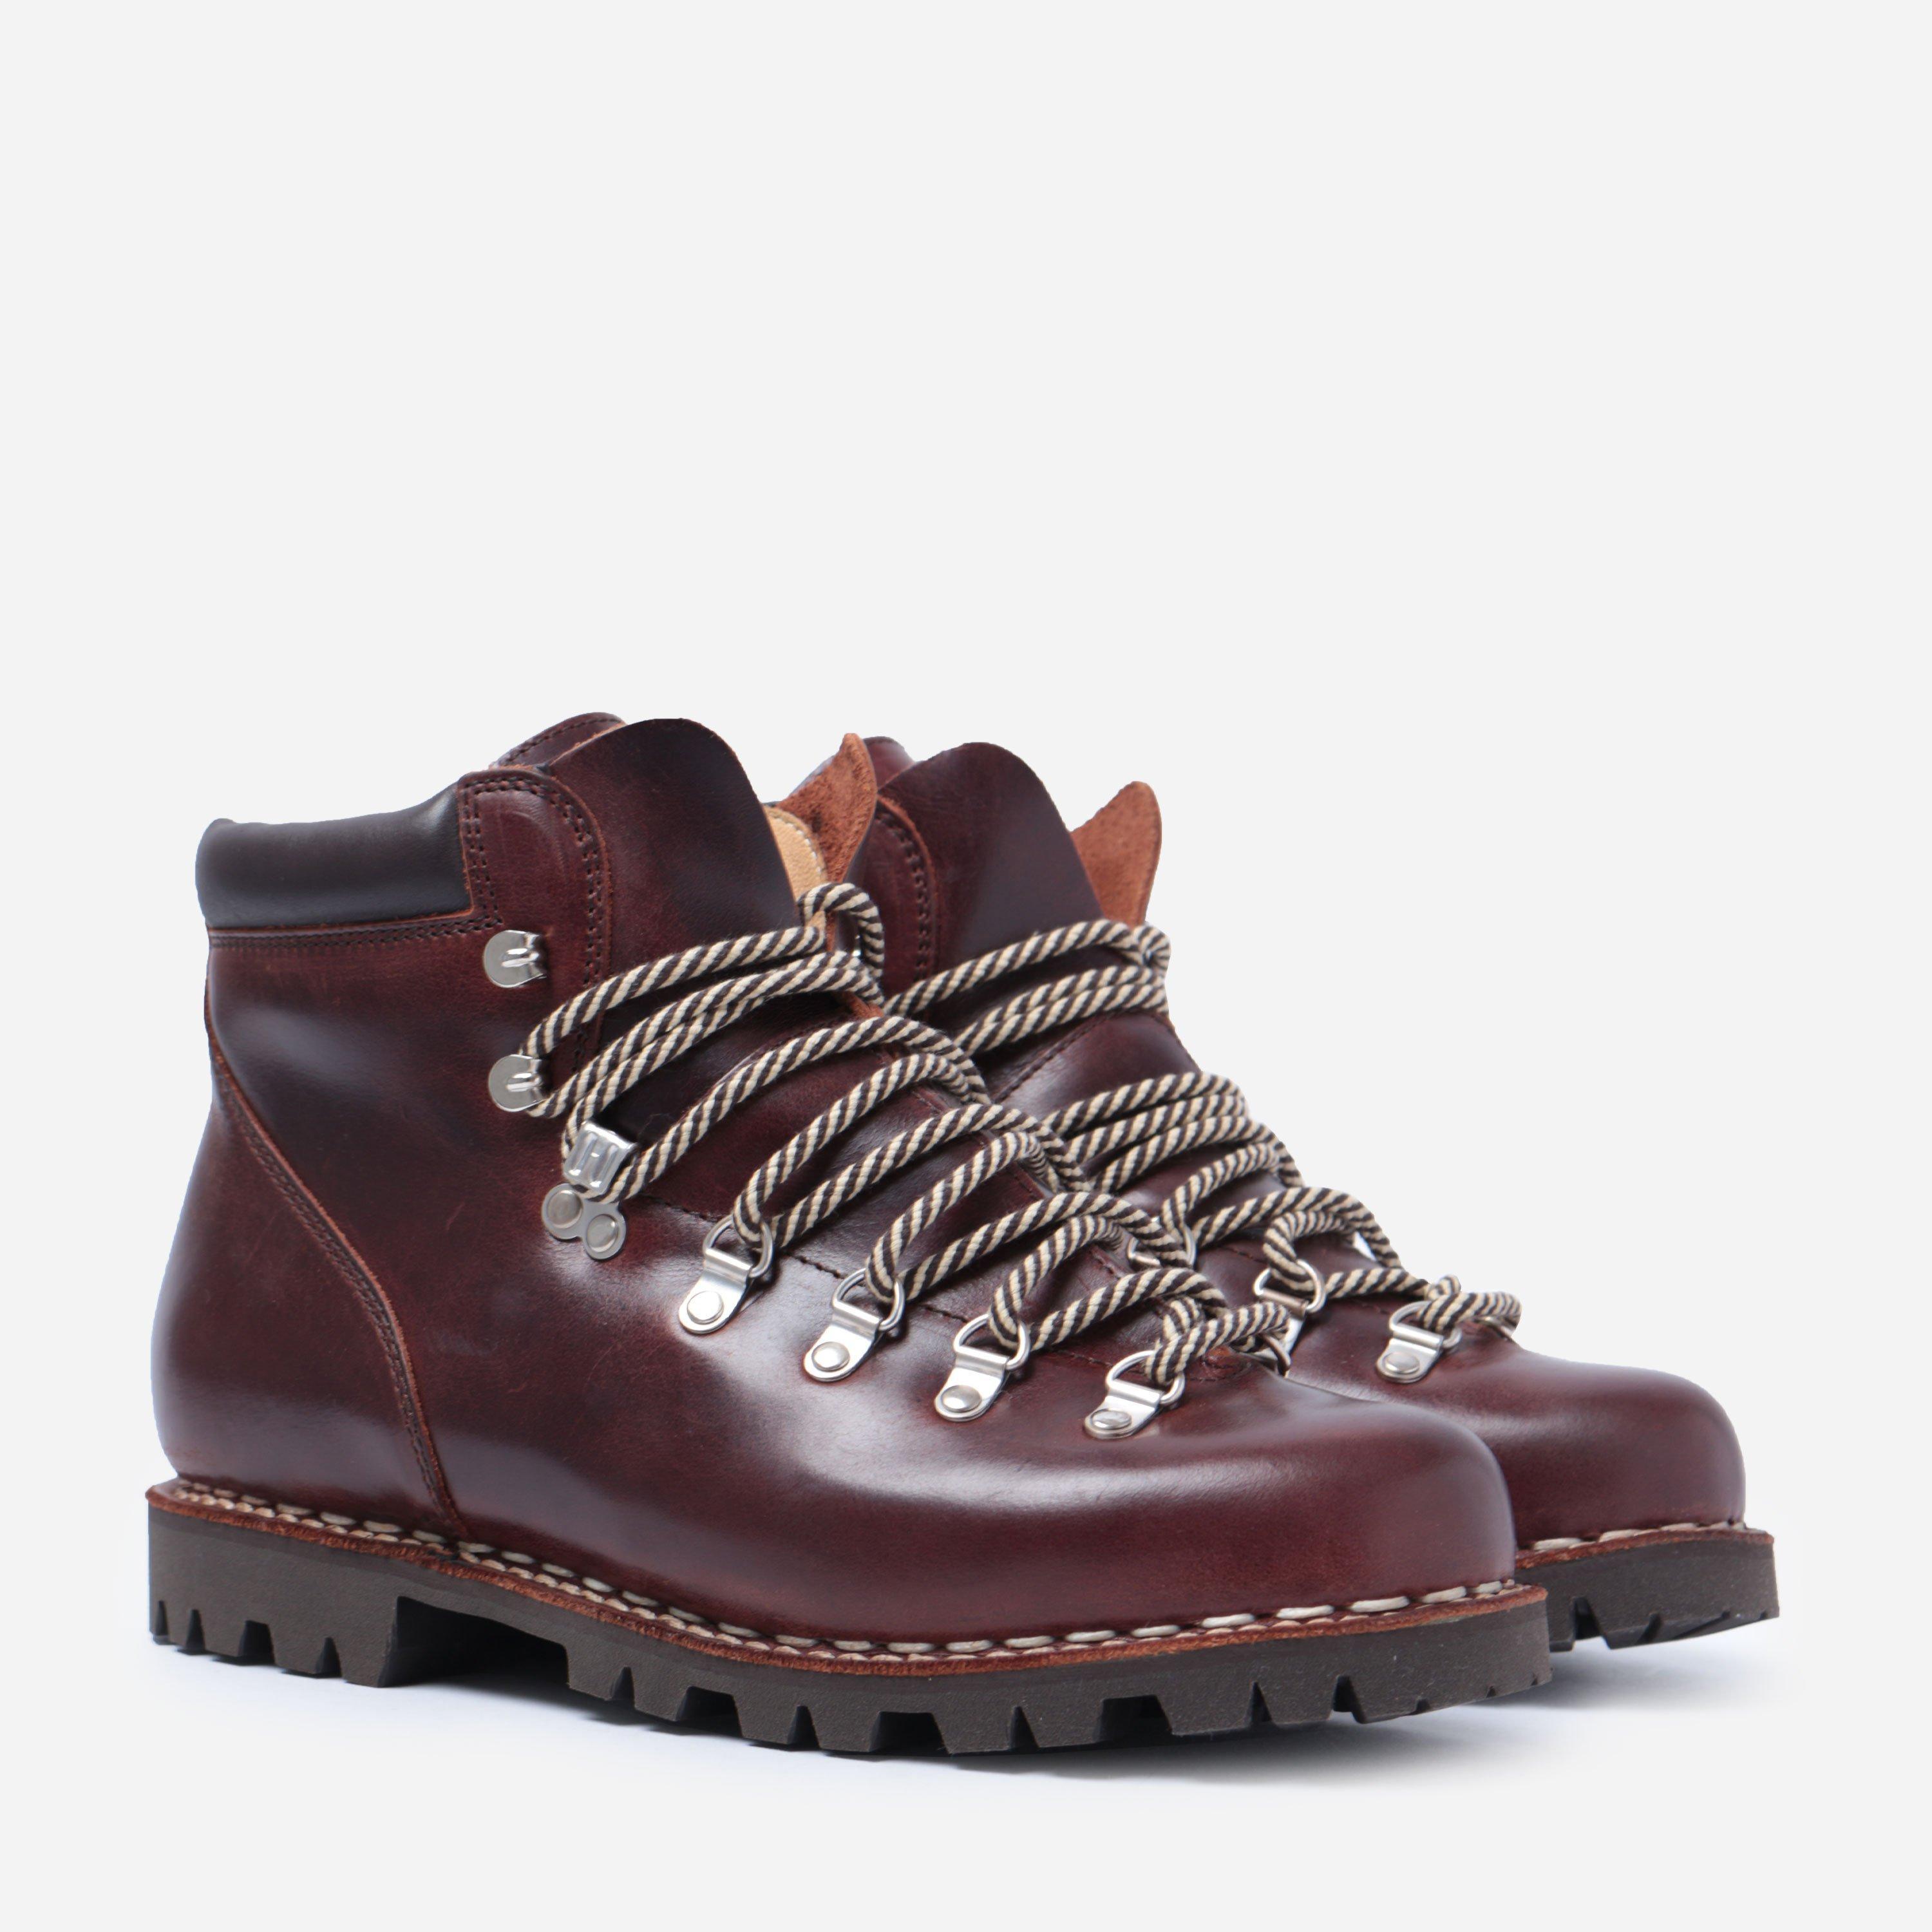 Paraboot Leather Avoriaz in Brown for Men - Save 30% - Lyst